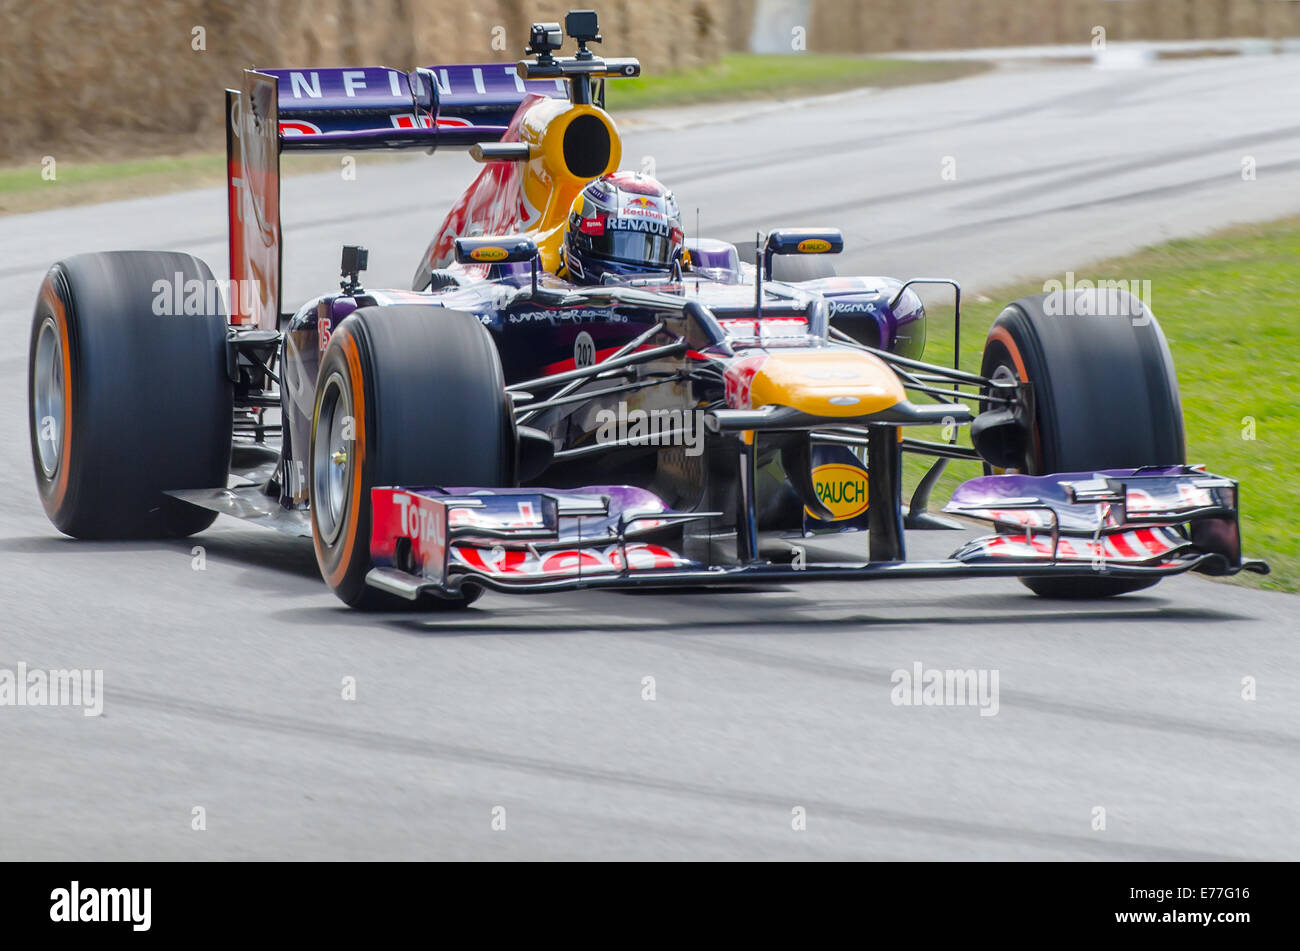 The Red Bull RB7 is a Formula 1 racing car designed by the Red Bull Racing  team for the 2011 Formula 1 season winning the title. Racing at Goodwood  Stock Photo - Alamy